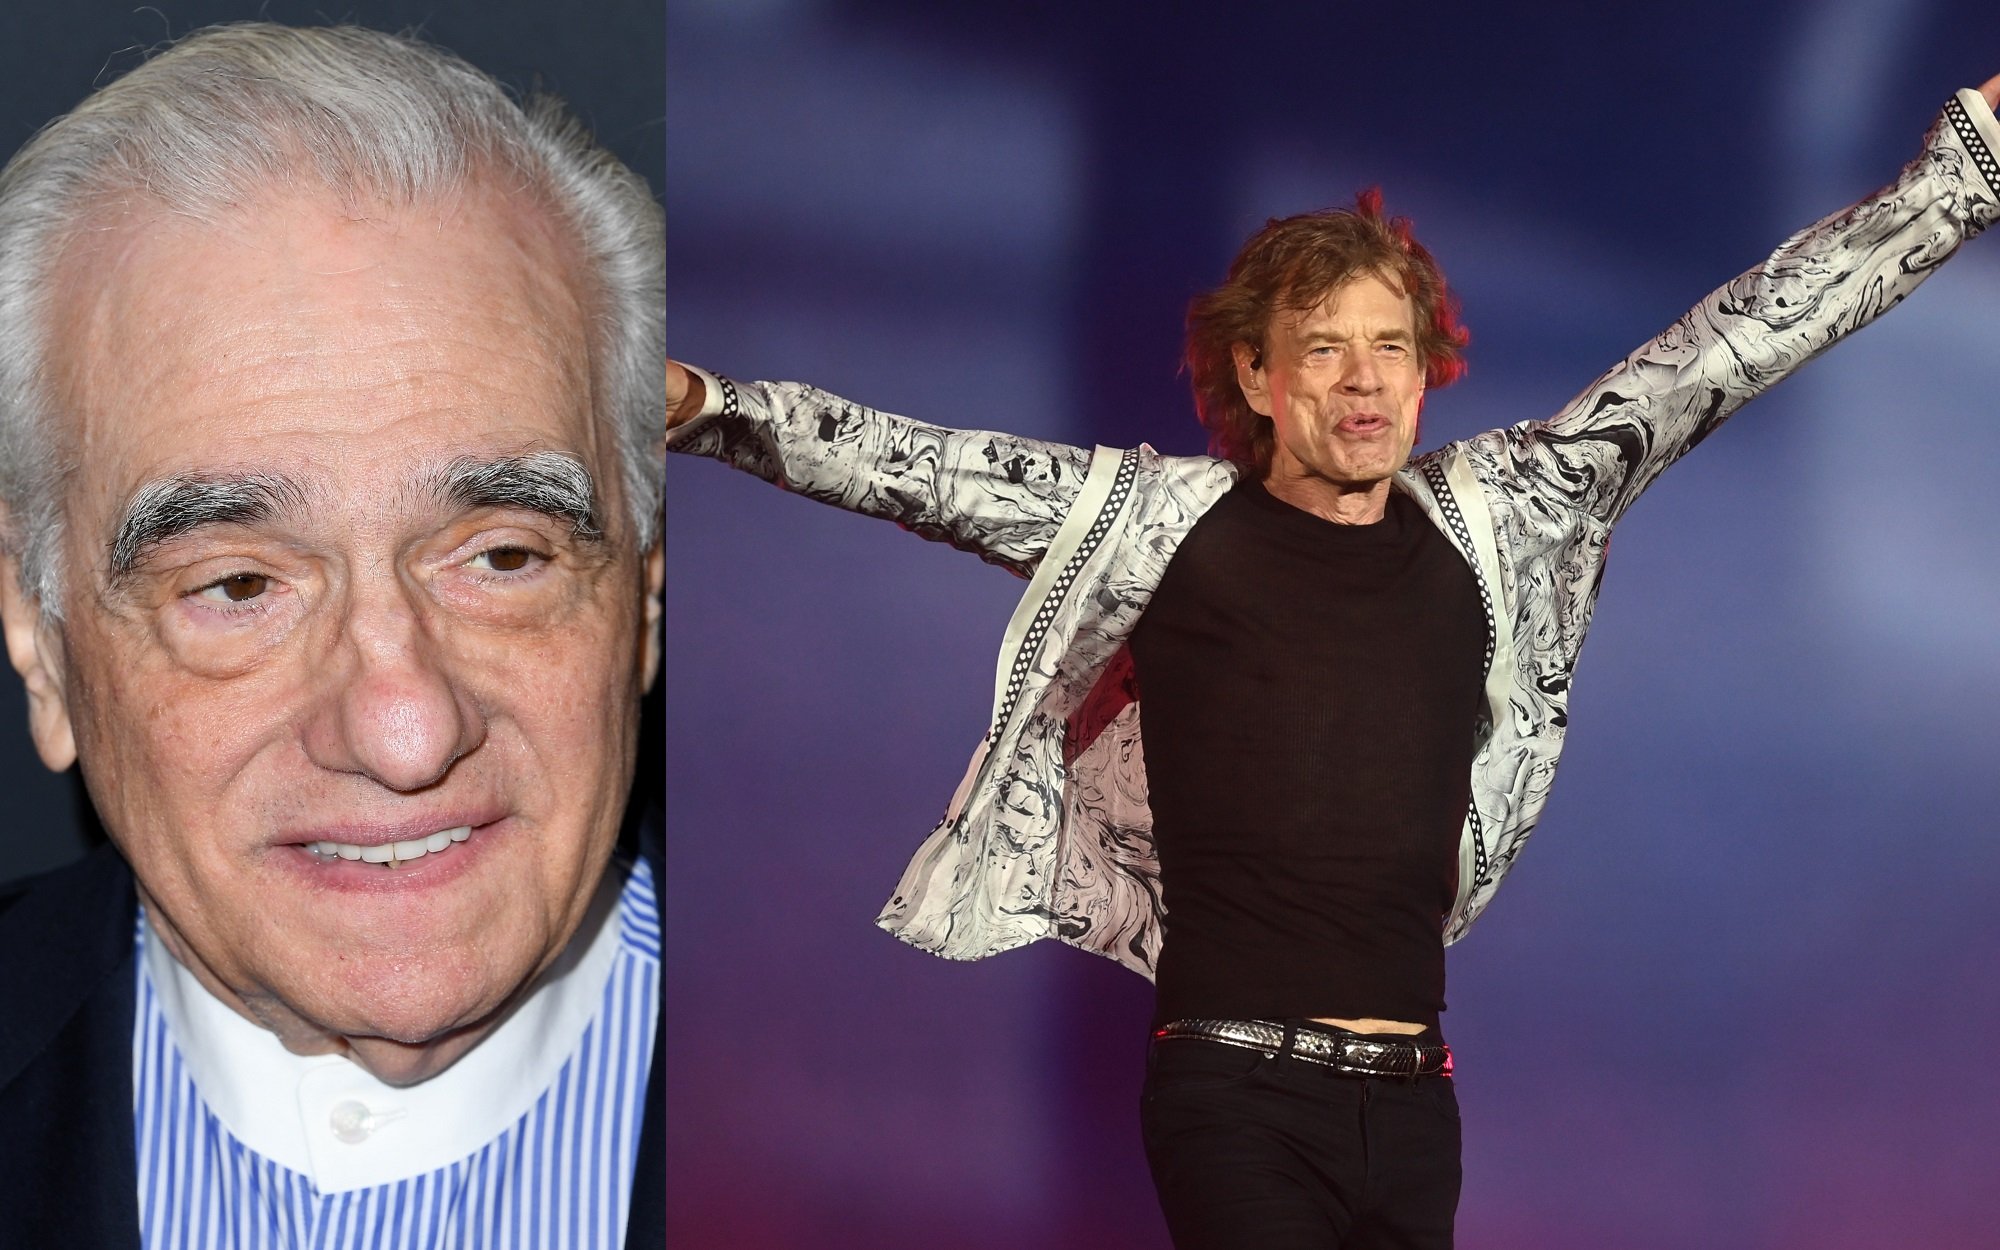 A joined photo of Martin Scorsese and Mick Jagger